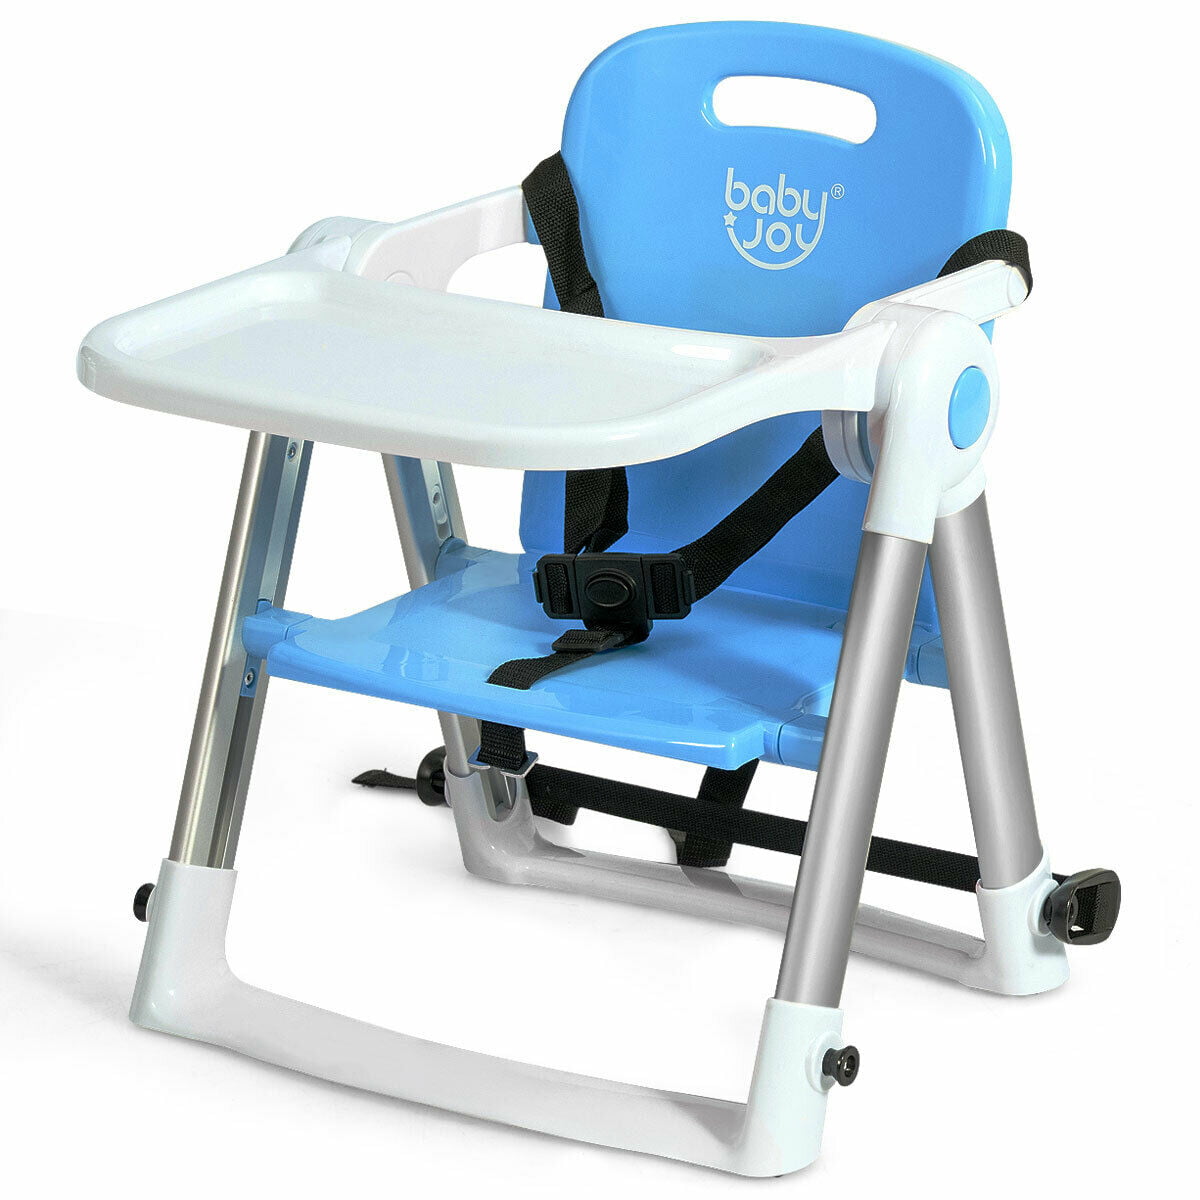 travel chair for toddler